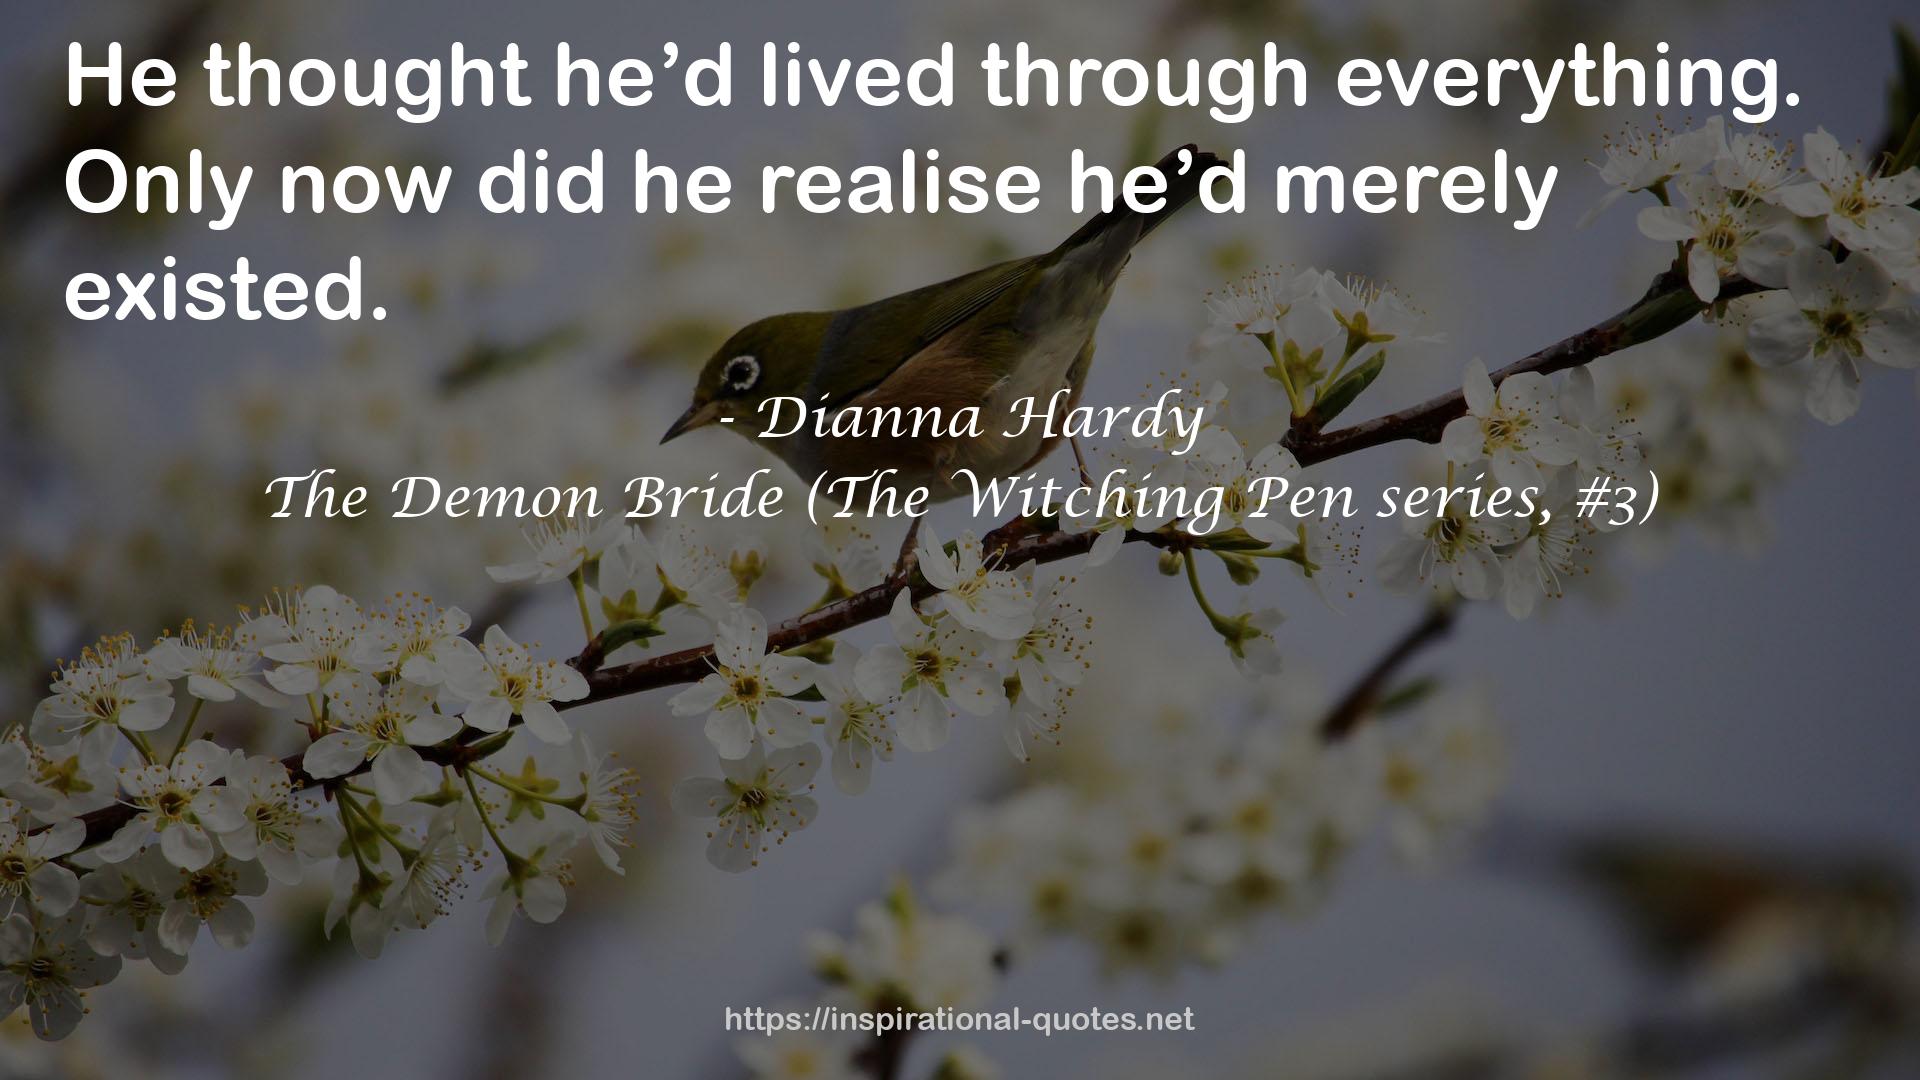 The Demon Bride (The Witching Pen series, #3) QUOTES